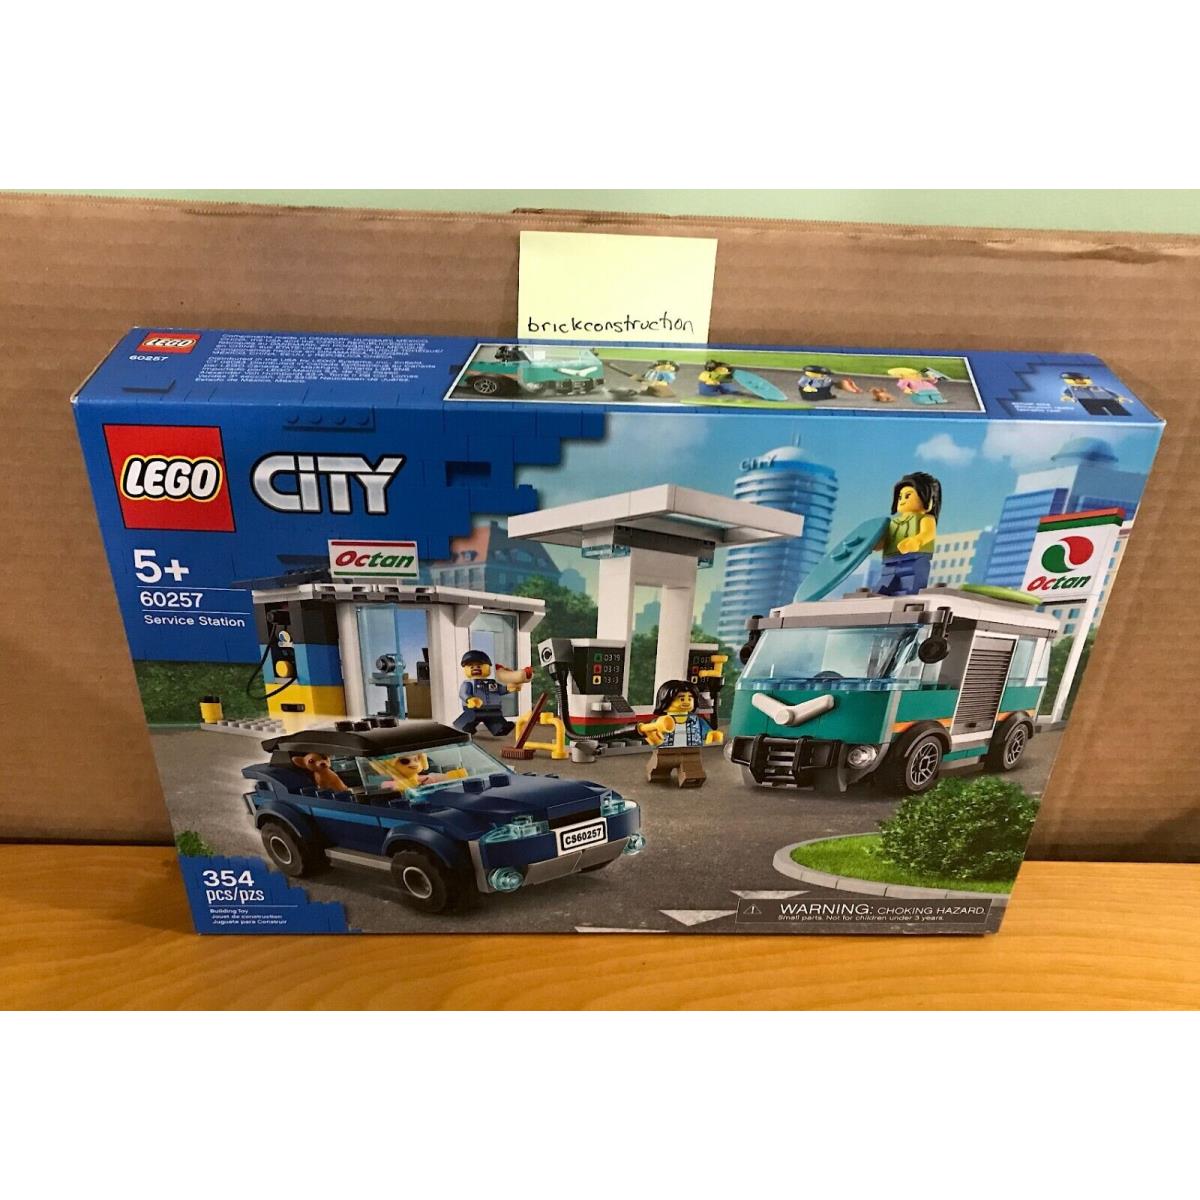 Lego City 60257 Service Station - and with Small Crease